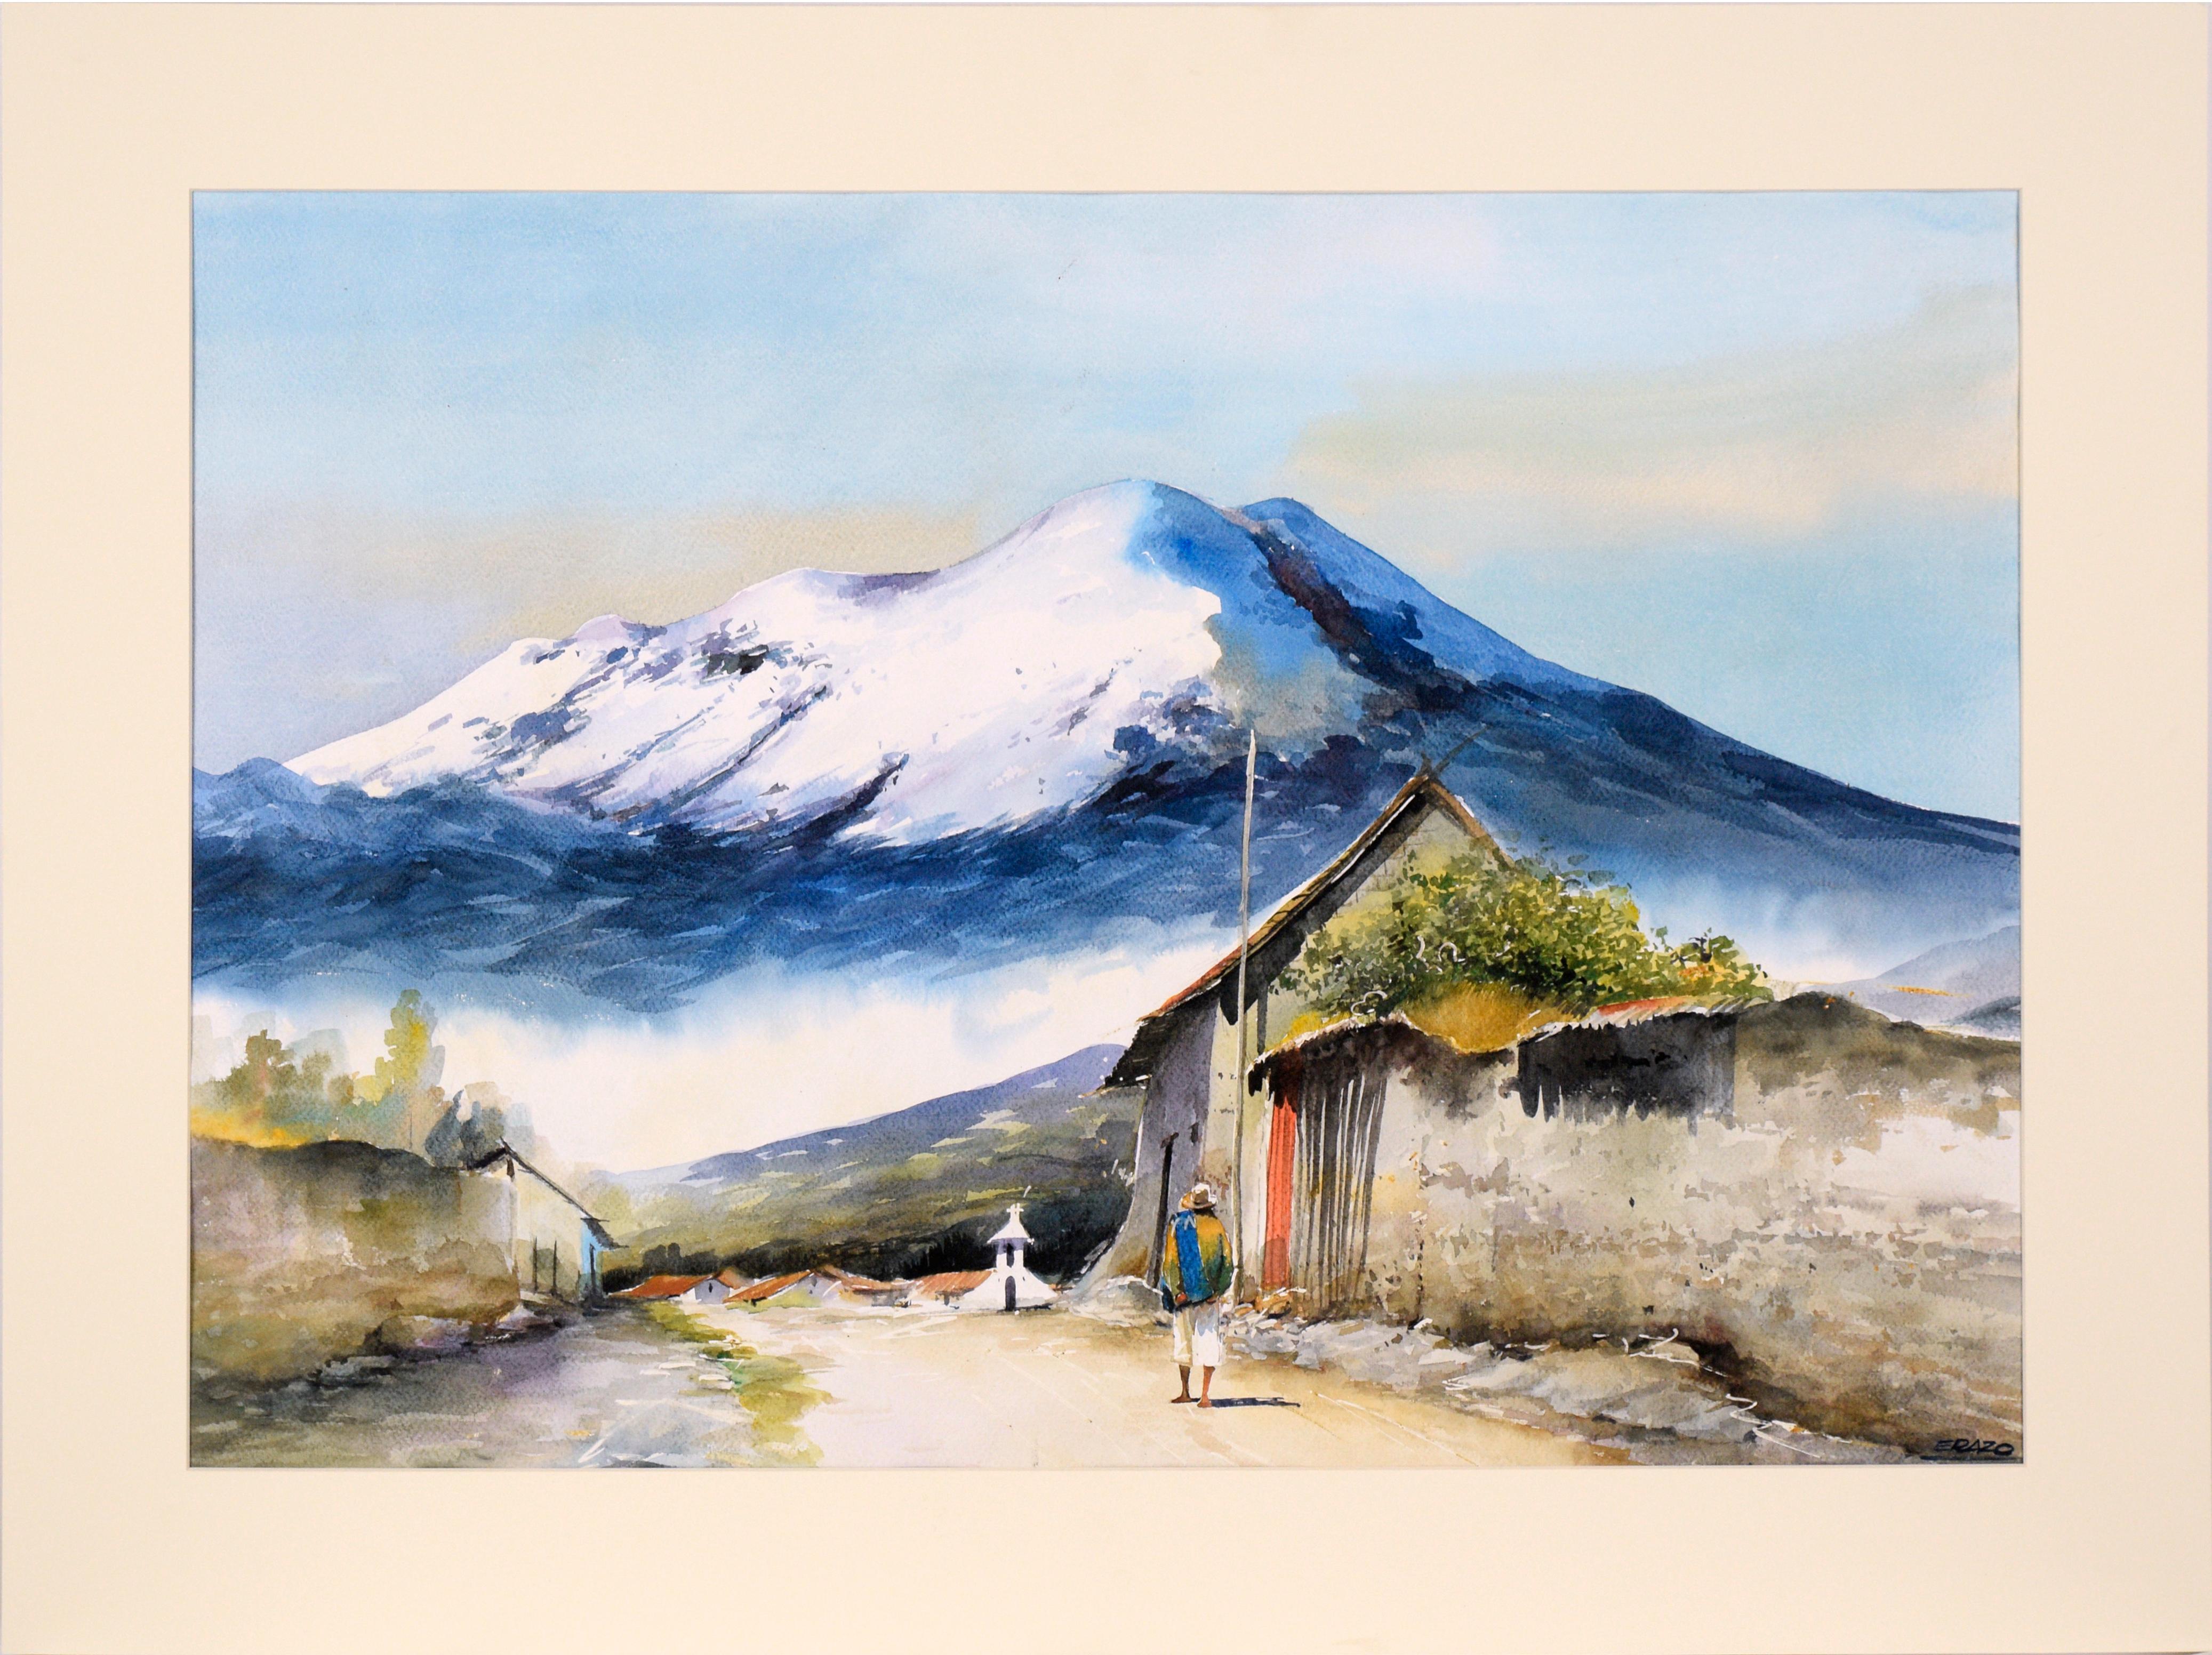 Erazo Landscape Painting - Village at the Base of the Andes Mountains - Watercolor Landscape on Paper